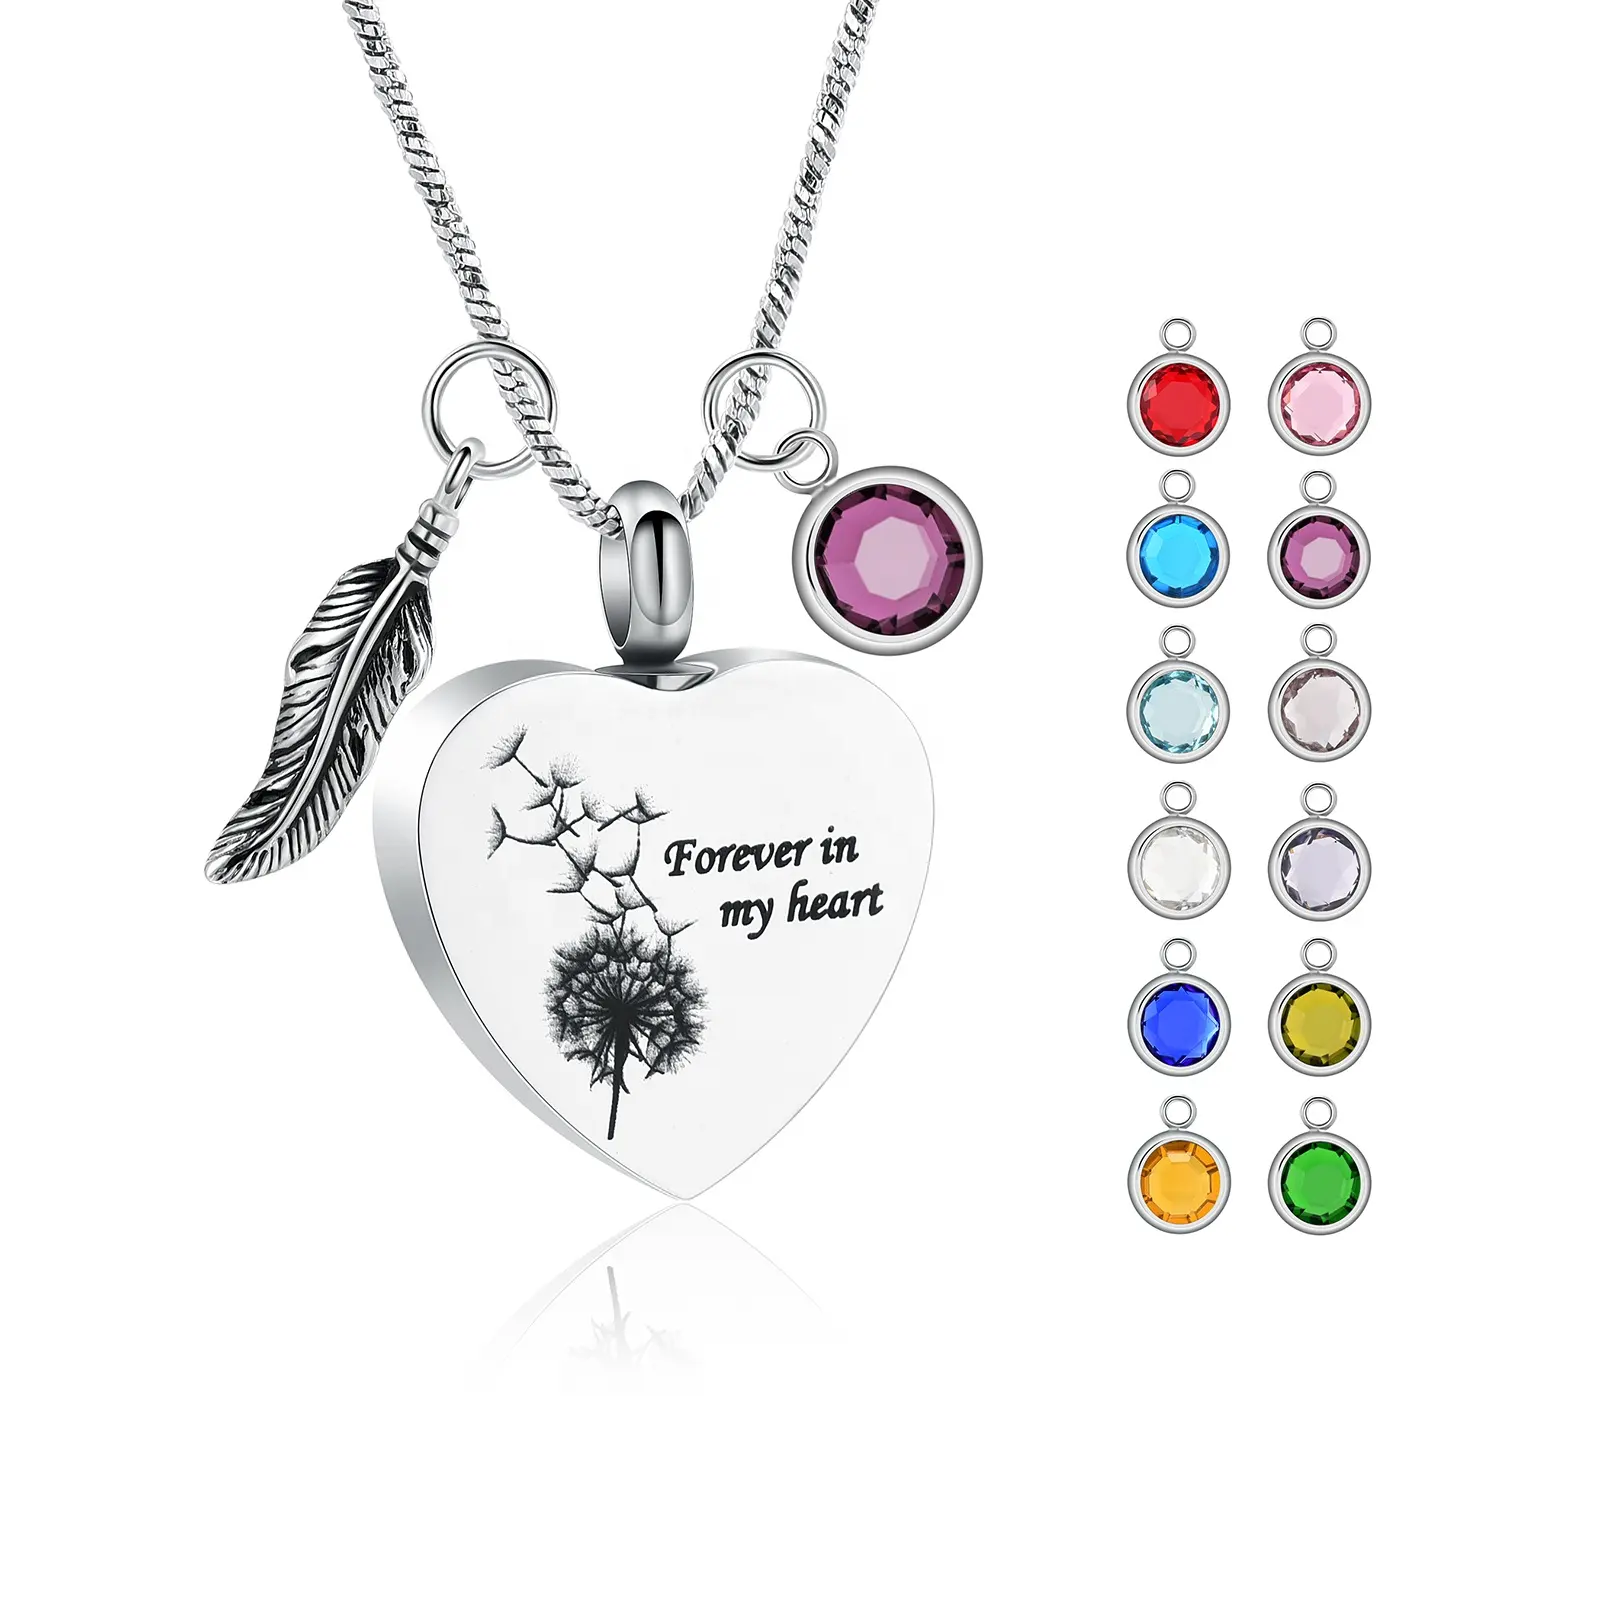 Wholesale Cremation Jewelry Dandelion Heart Urn Necklace for Ashes with 12 Birthstones Memorial Ashes Necklace for Loved One